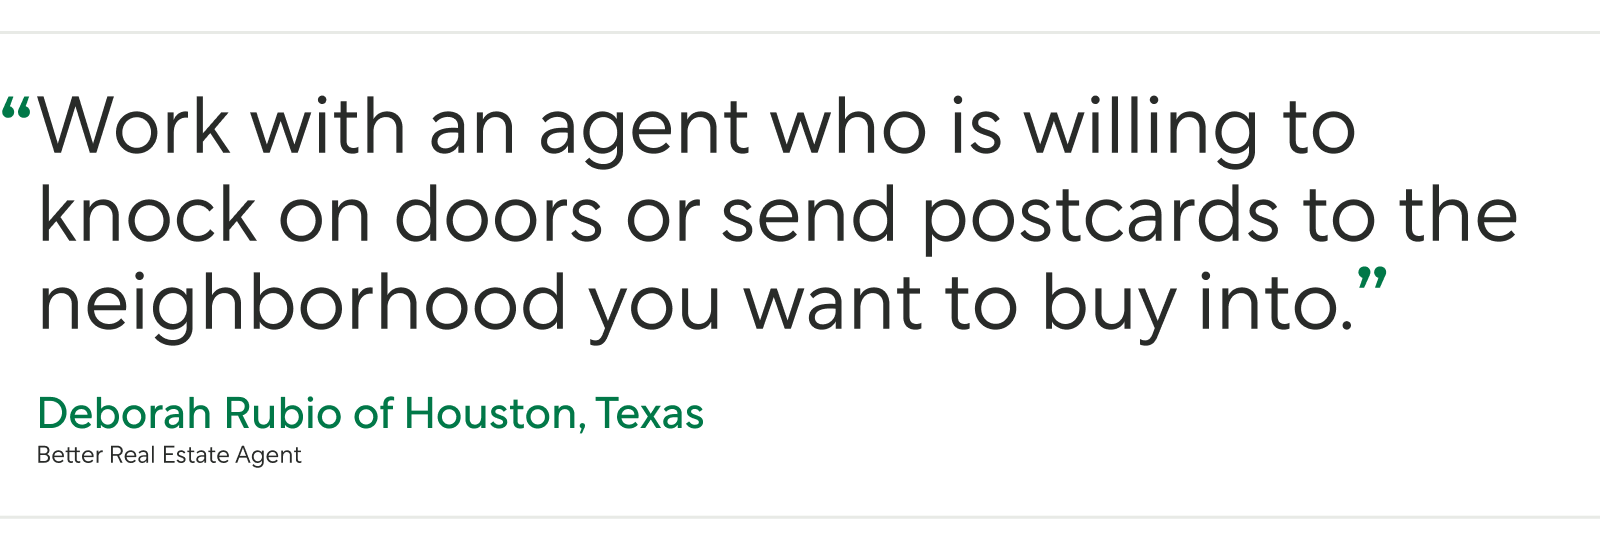 "Pull Quote From Better Real Estate Agent Deborah Rubio: “Work with an agent who is willing to knock on doors or send postcards to the neighborhood you want to buy into.”